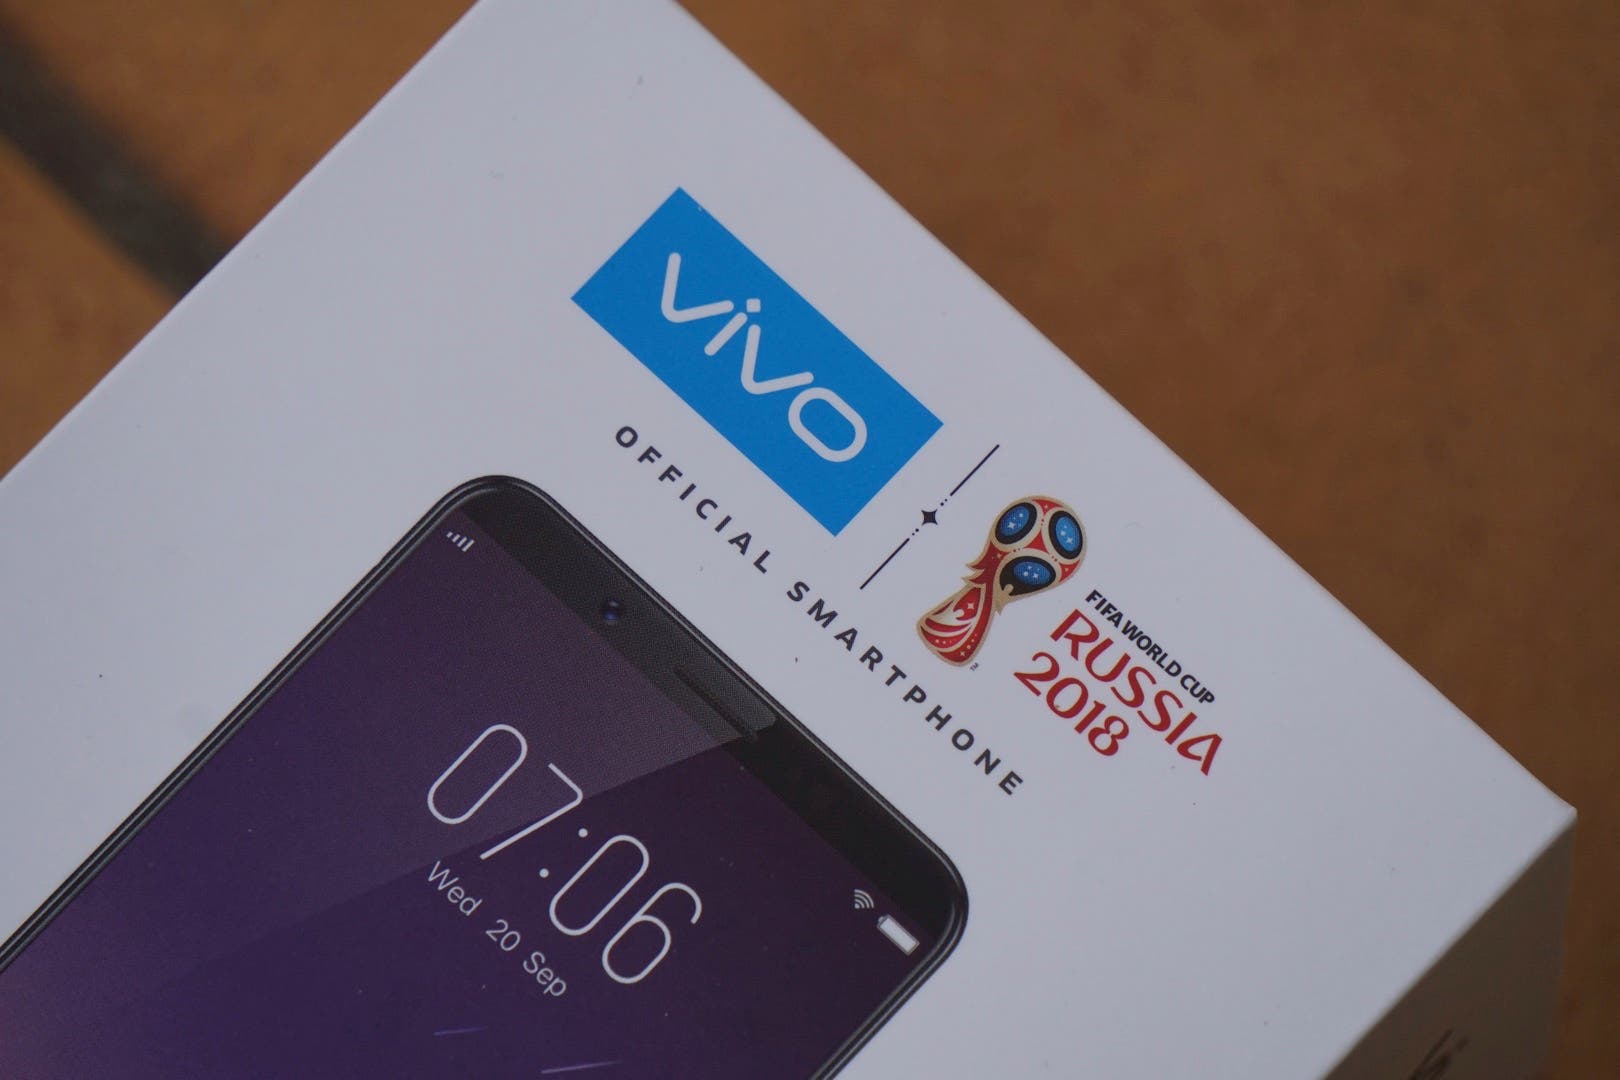 Vivo V7+ Unboxing And First Impressions 